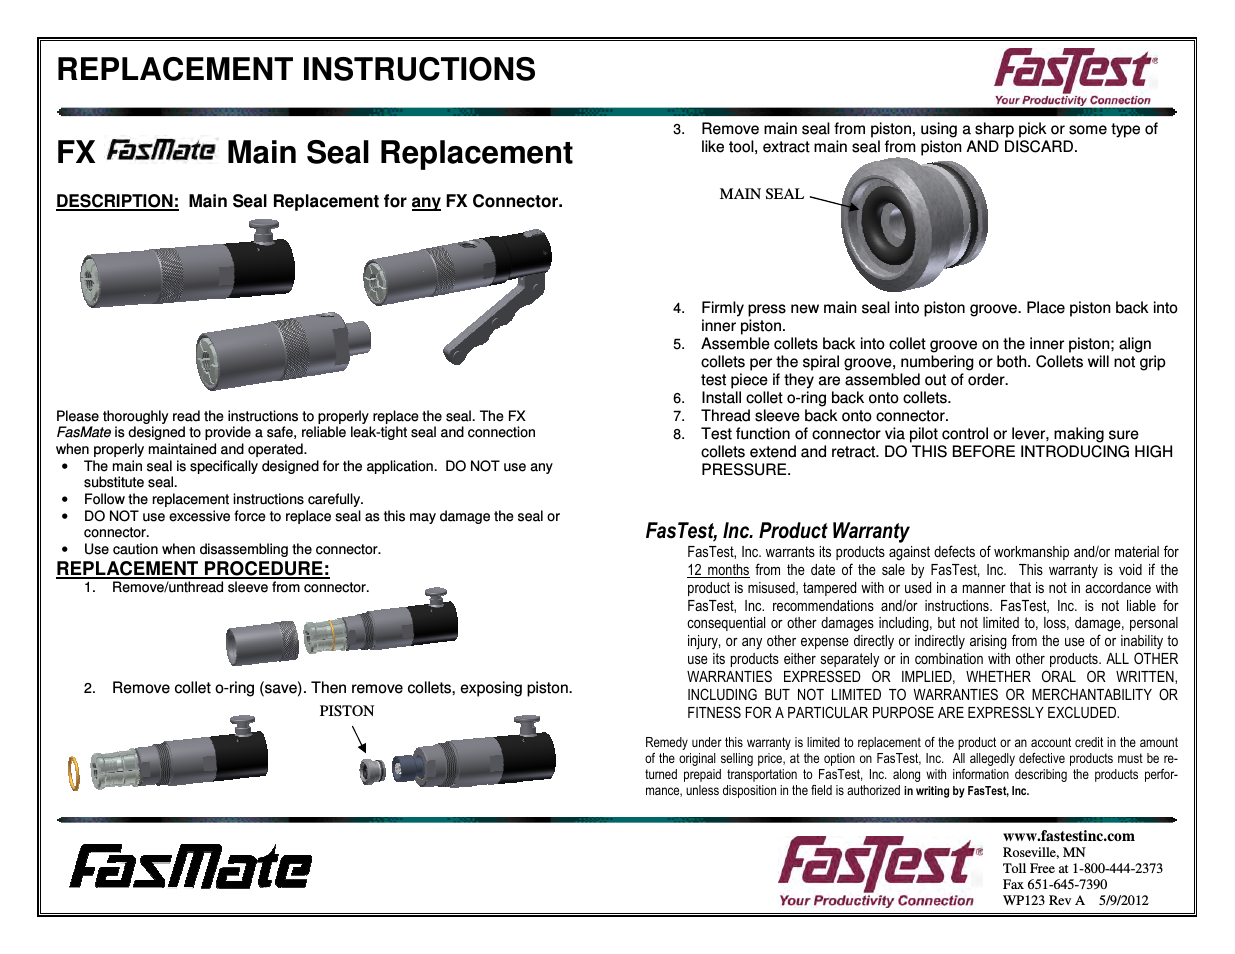 FasMate FX Series Main Seal Replacement